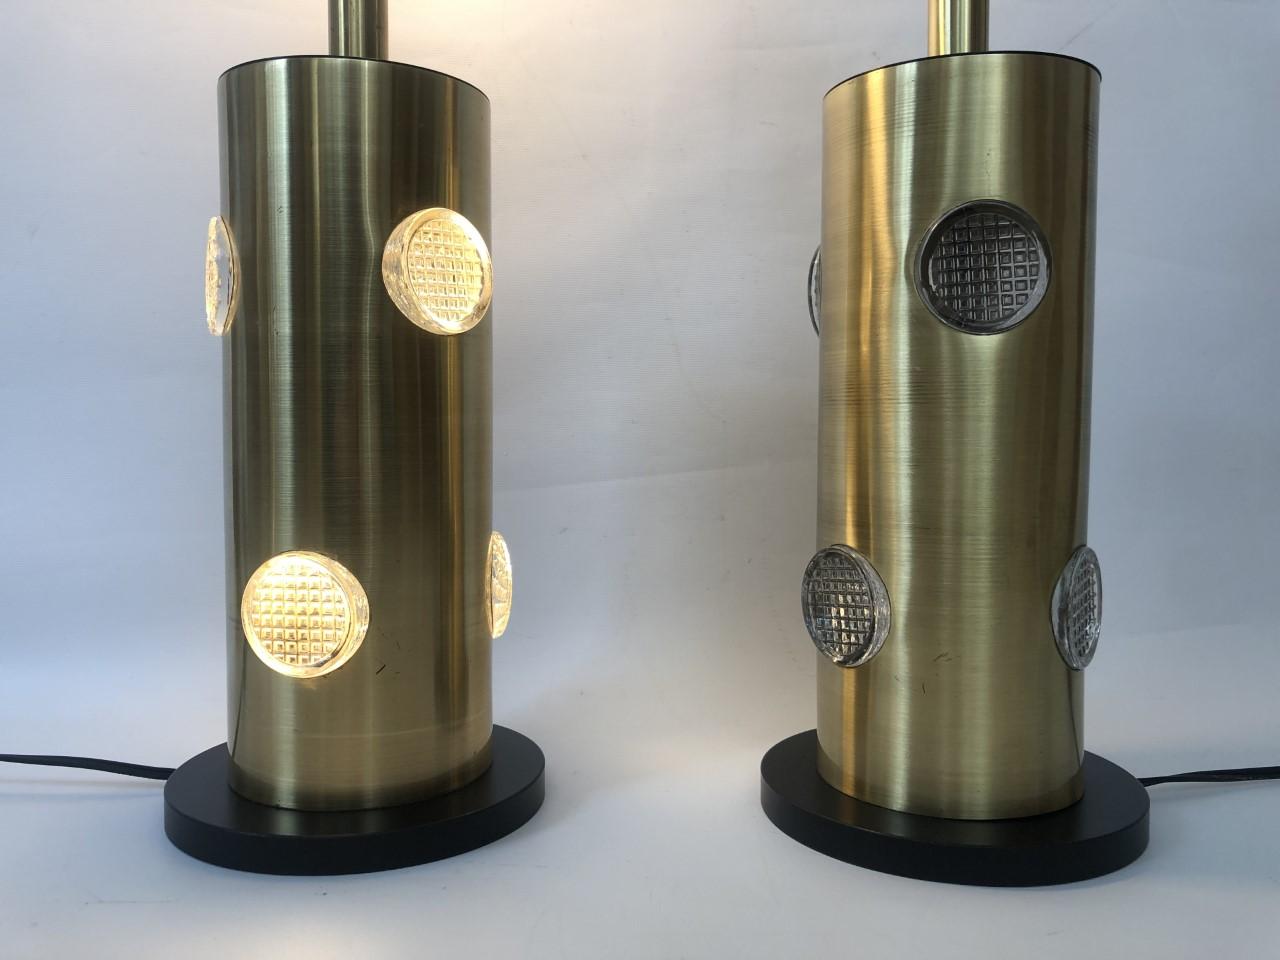 Danish Midcentury Pair of Brass Glass Table Lamps, 1970s For Sale 6